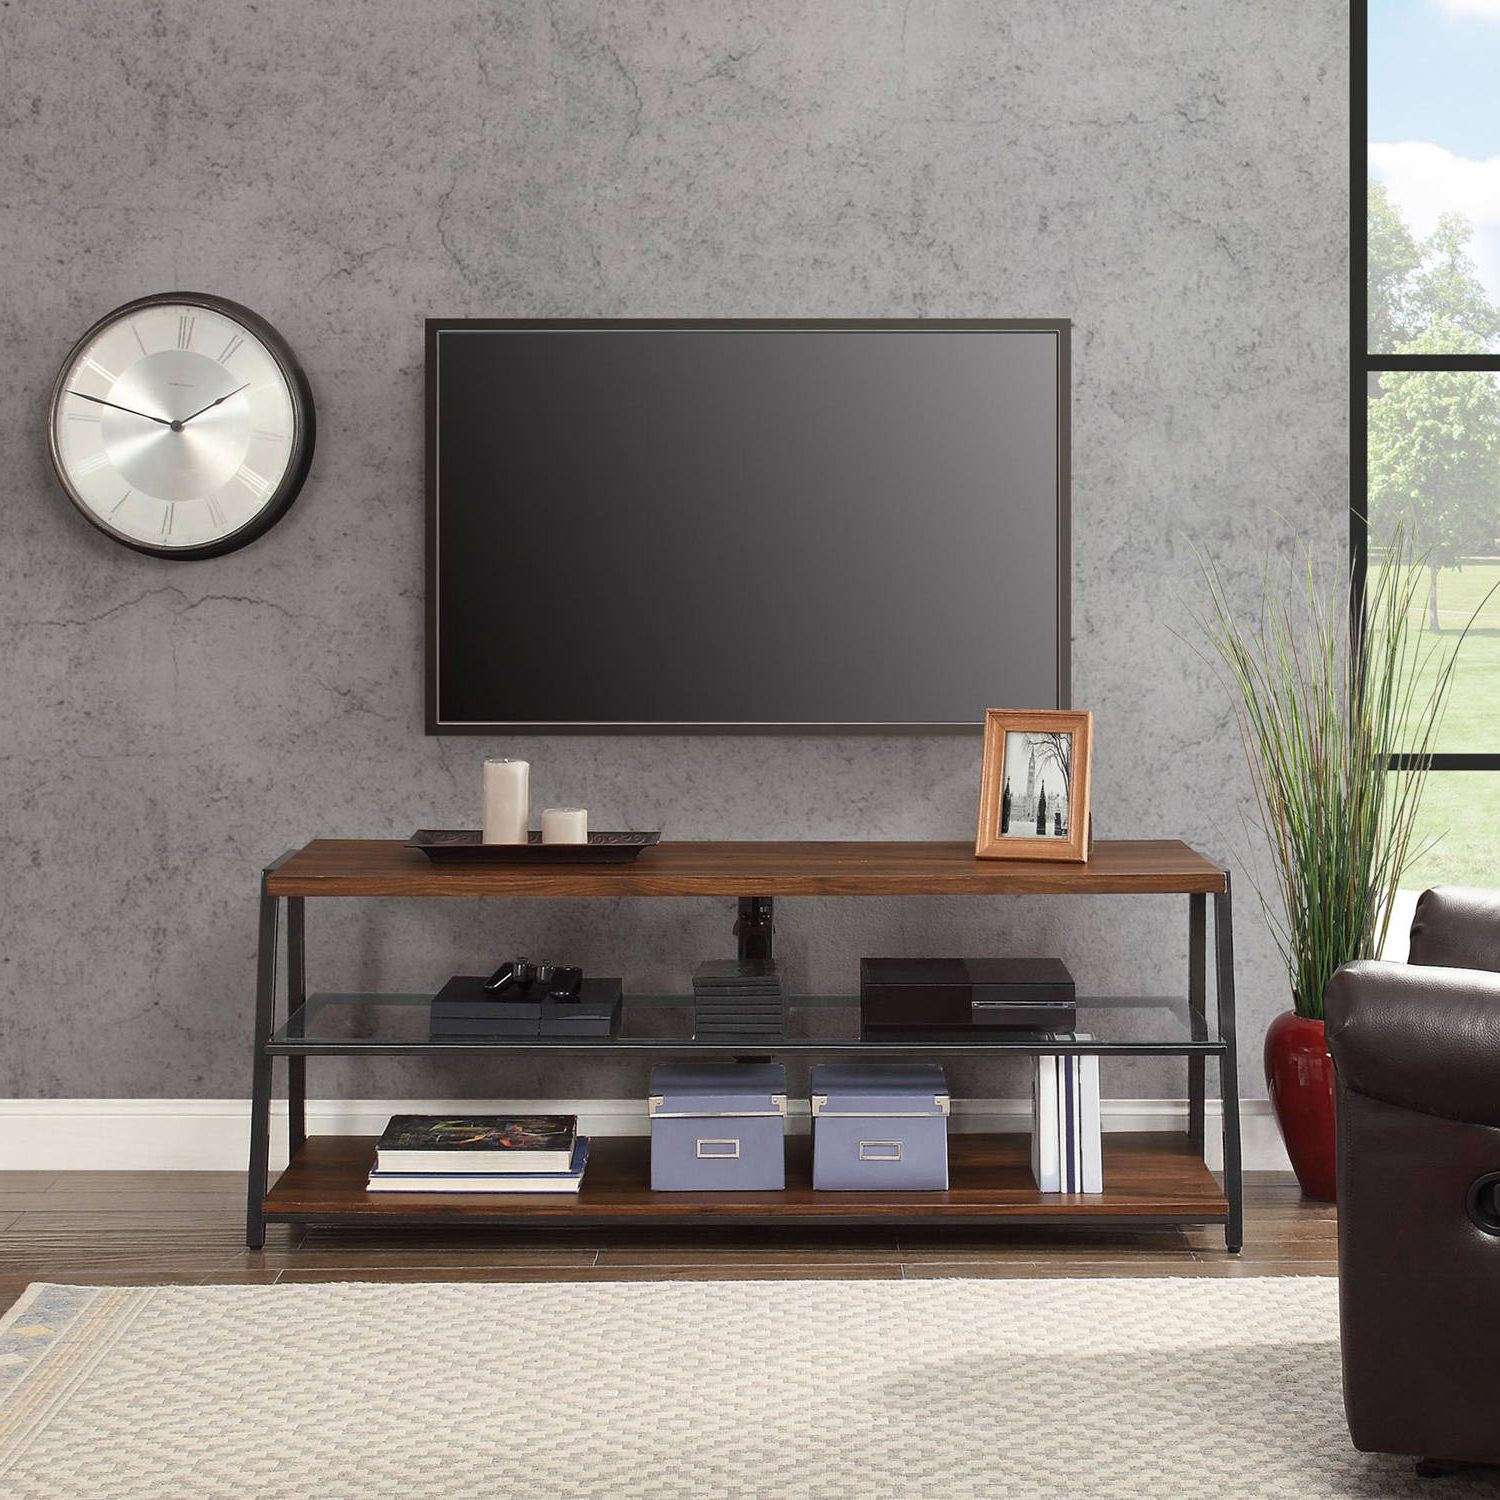 Favorite Mainstays Arris 3 In 1 Tv Stand For Televisions Up To 70 For Mainstays Arris 3 In 1 Tv Stands In Canyon Walnut Finish (View 7 of 10)